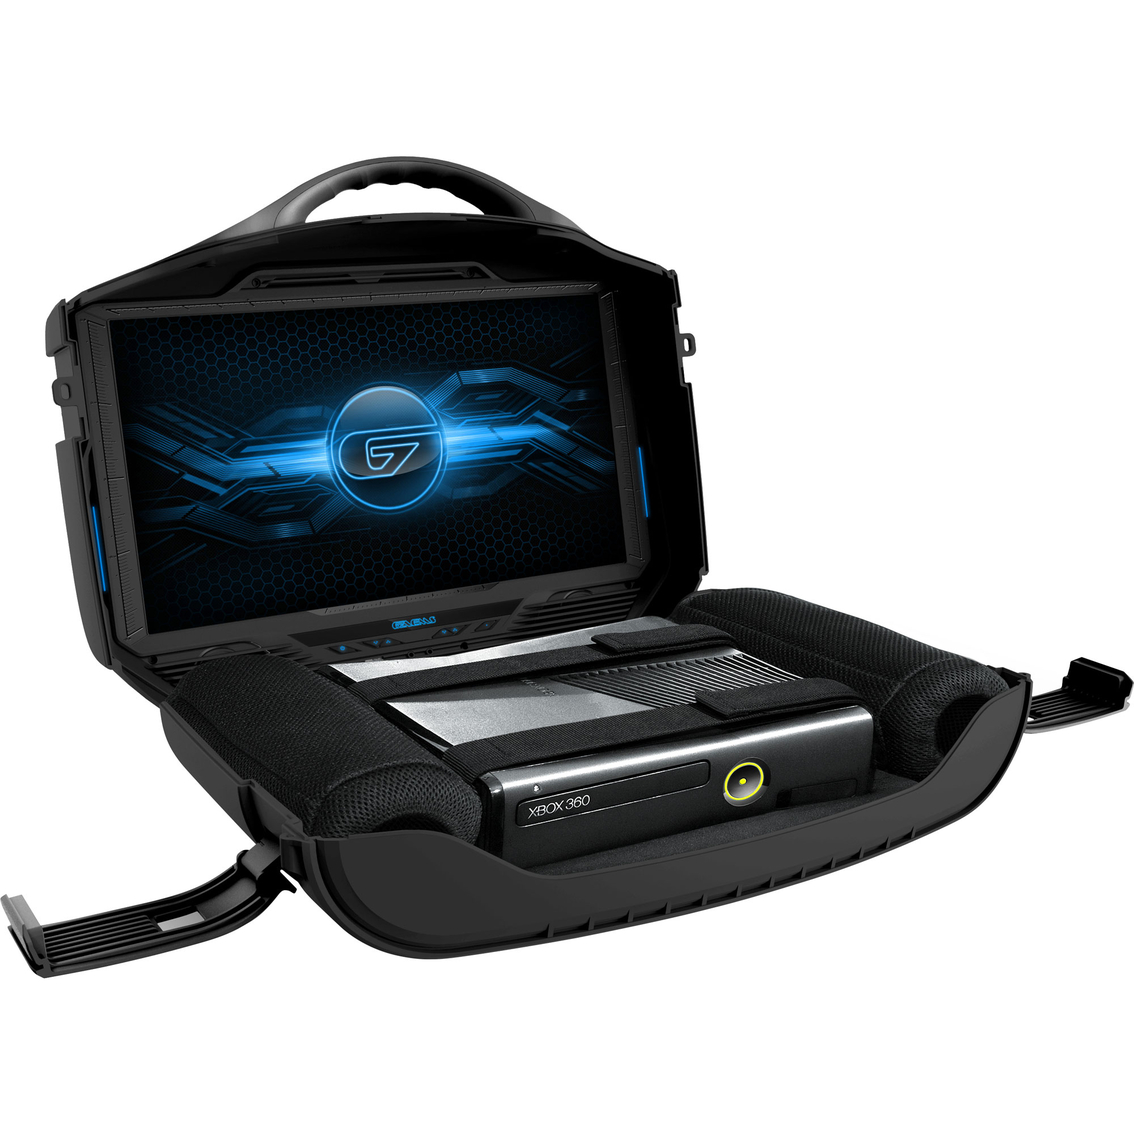 Gaems 19 In Vanguard Personal Gaming Environment Xbox 360 Accessories Electronics Shop The Exchange